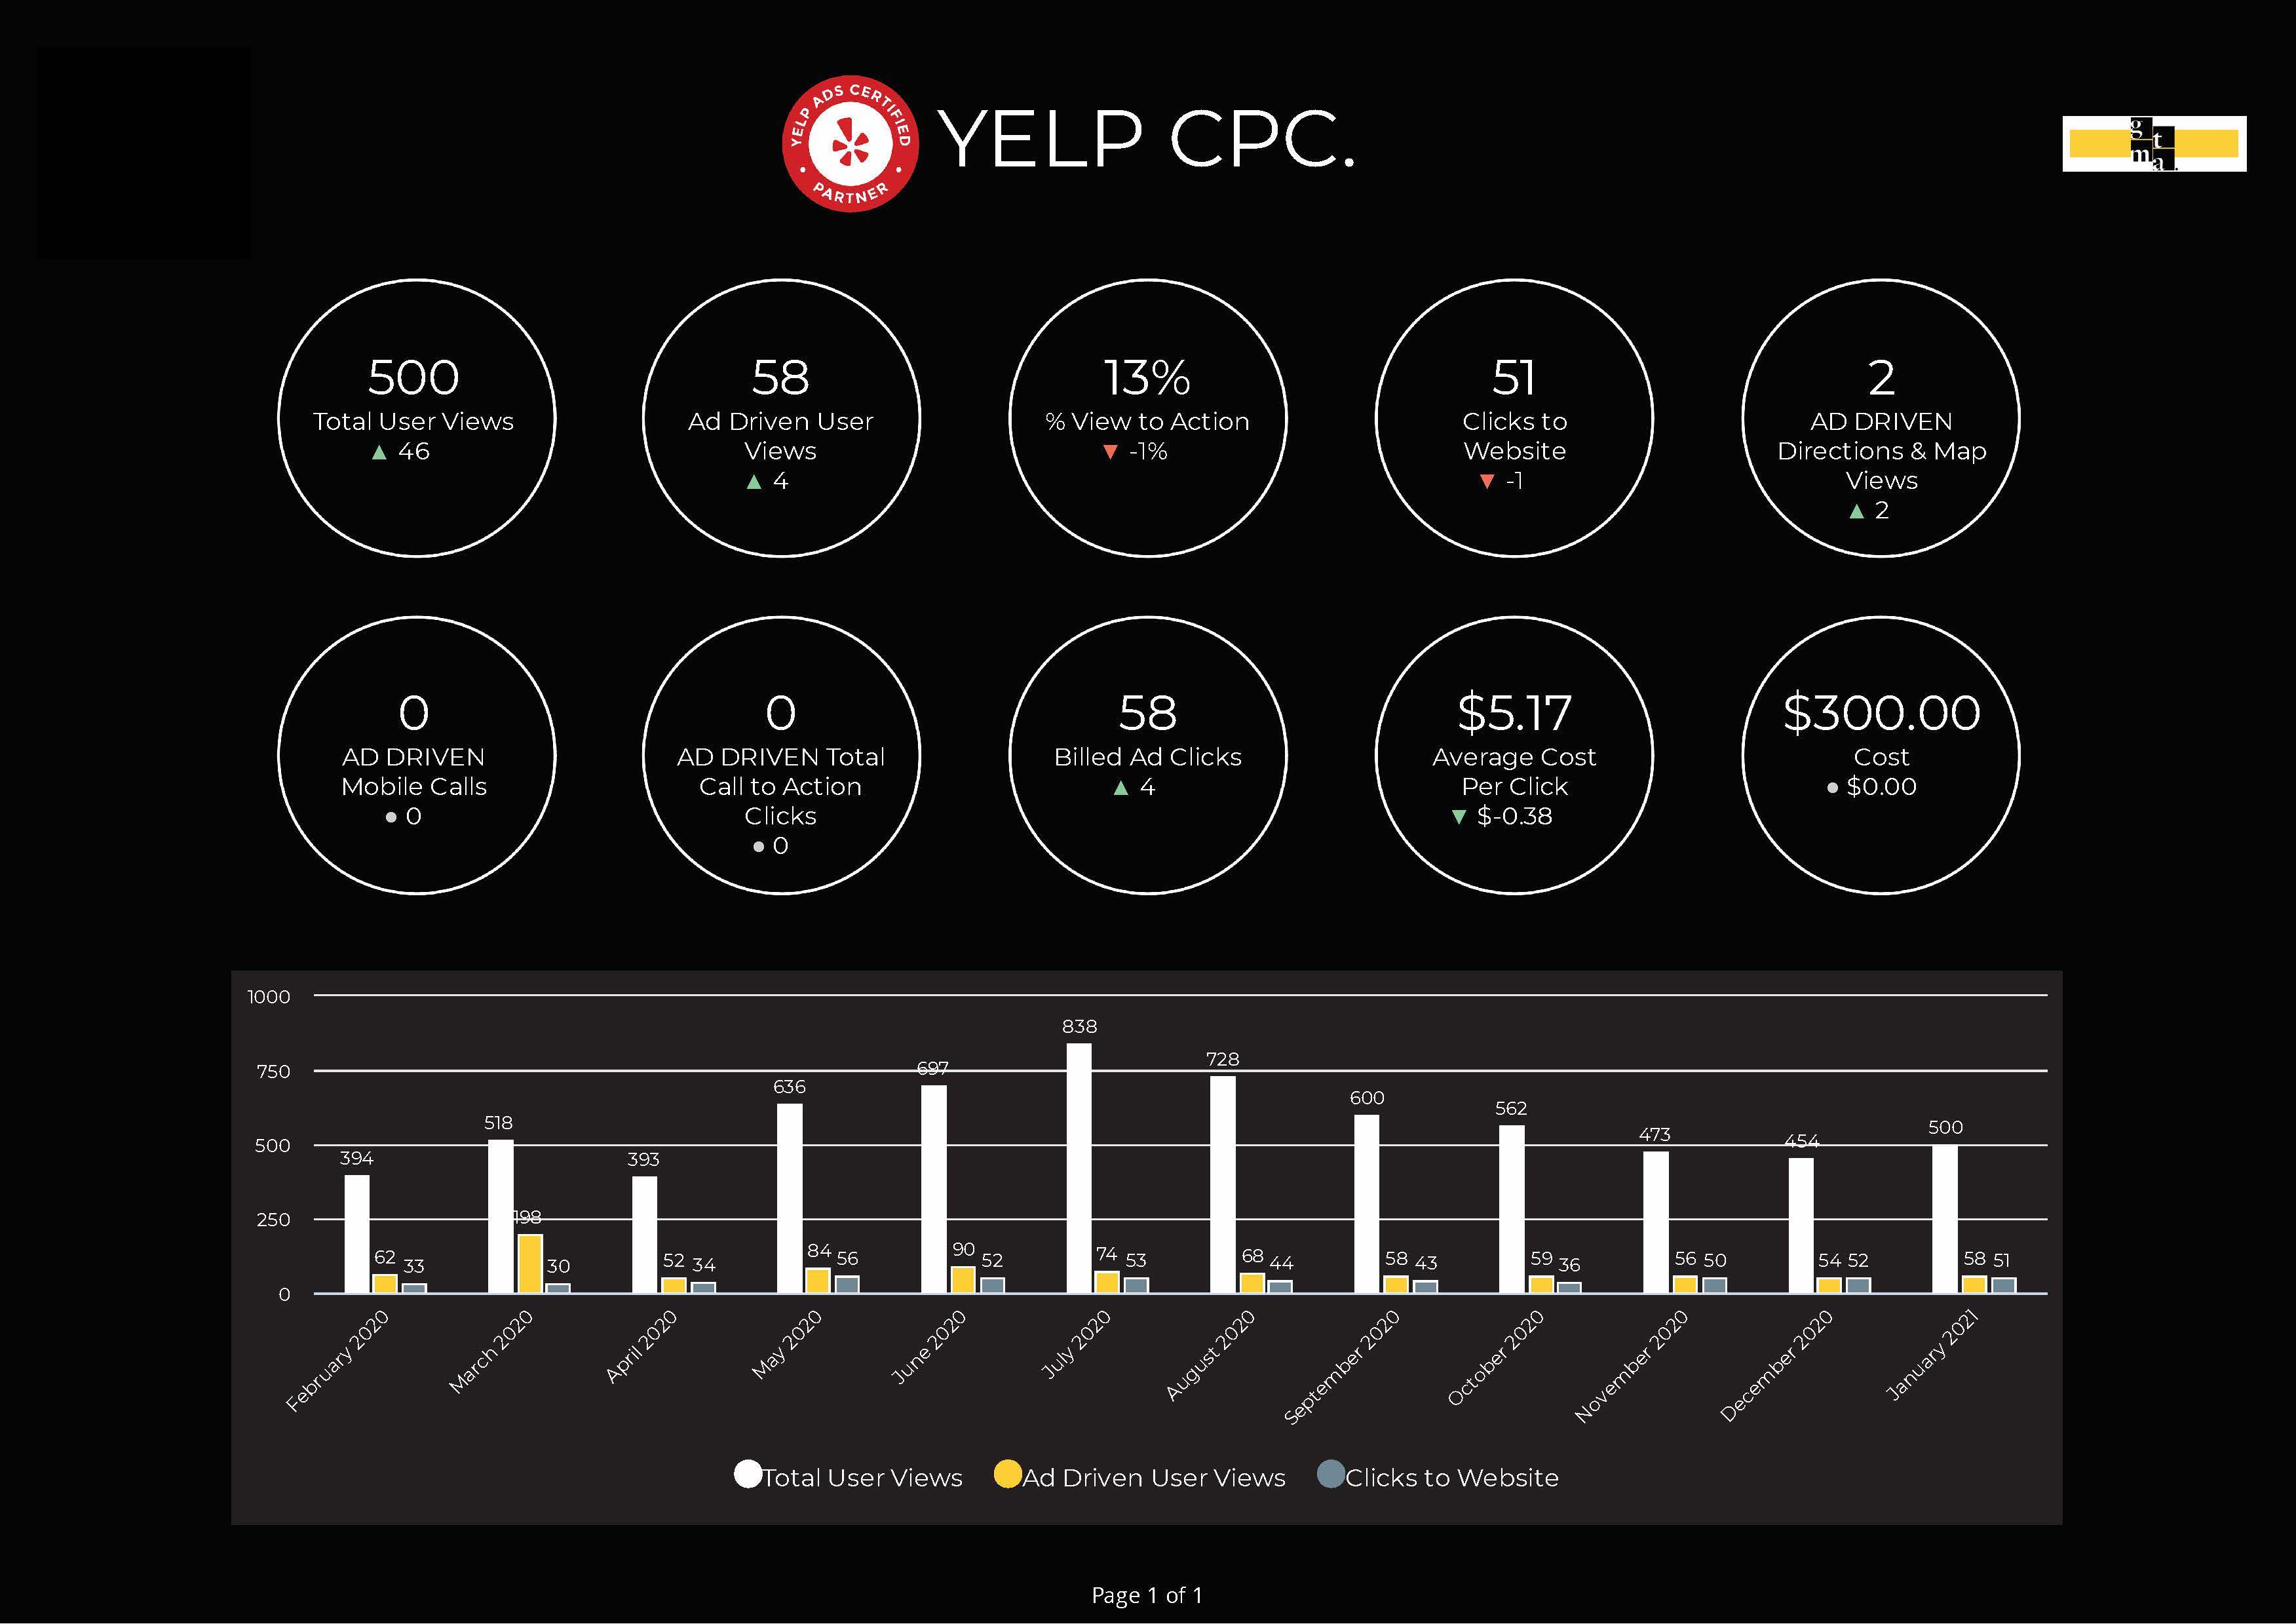 Yelp Ads Metrics highlighting views, website clicks, cost per click and more.